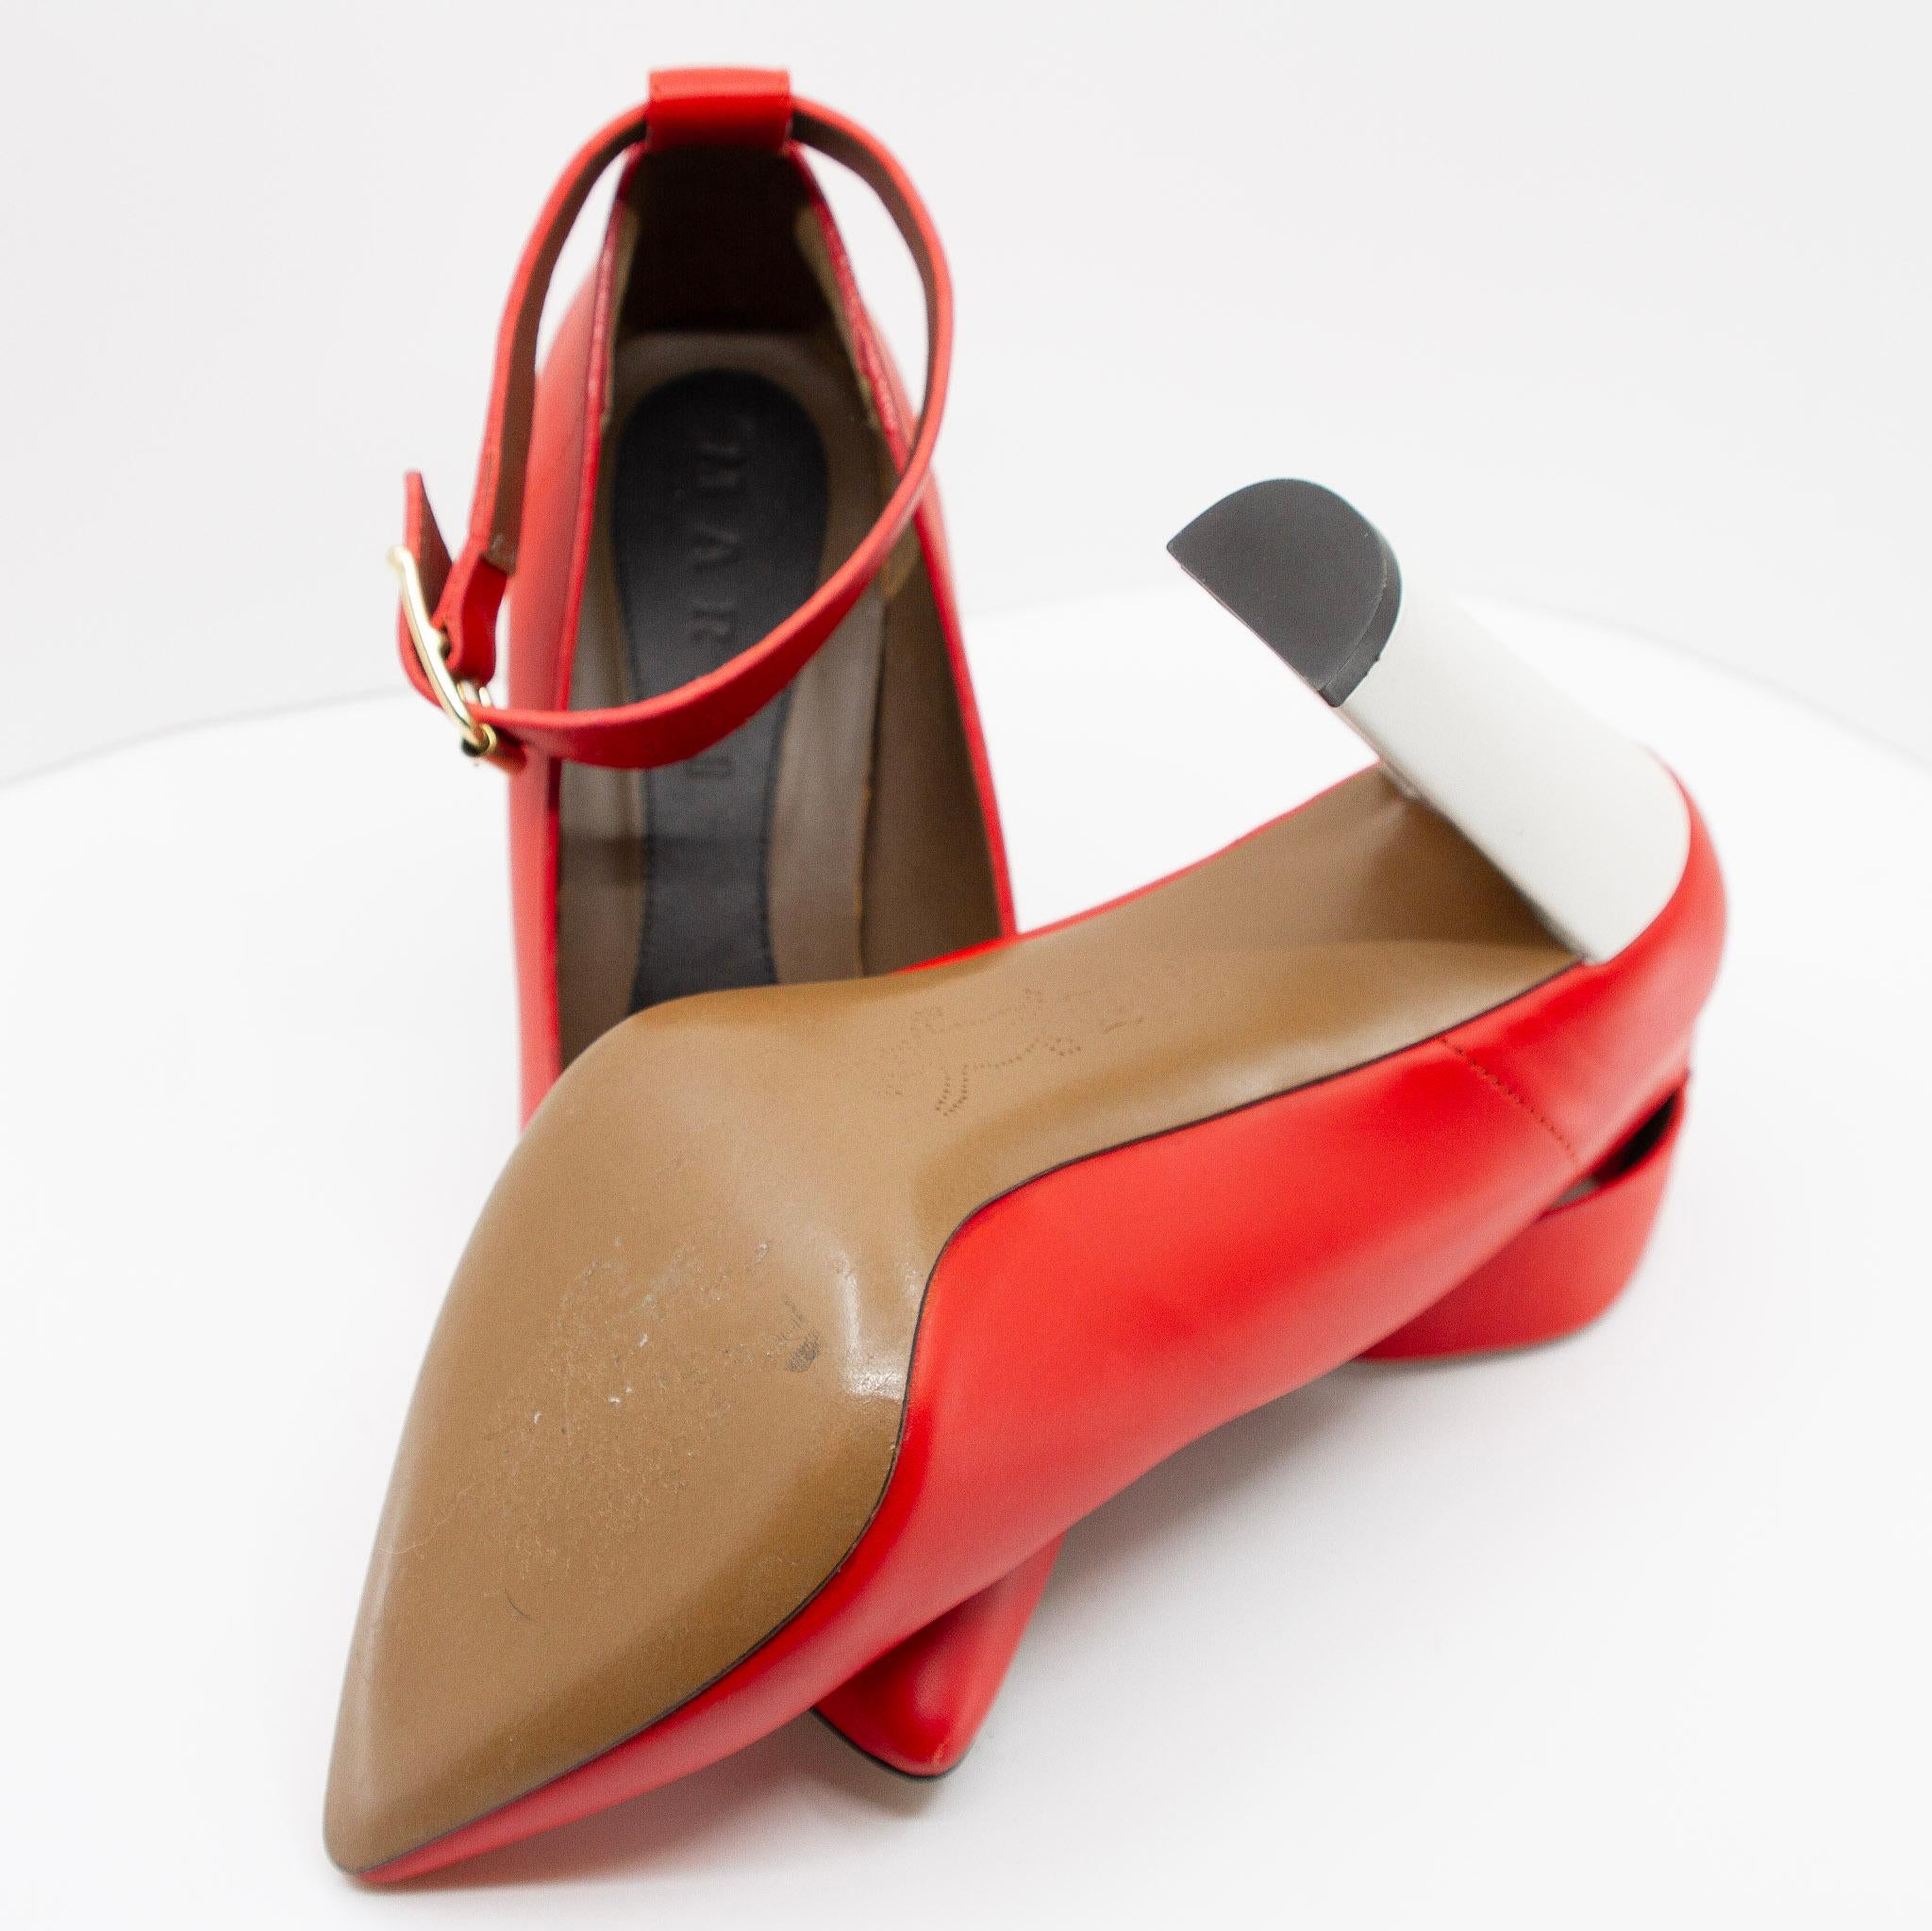 Marni's Cherry Red Pumps 2